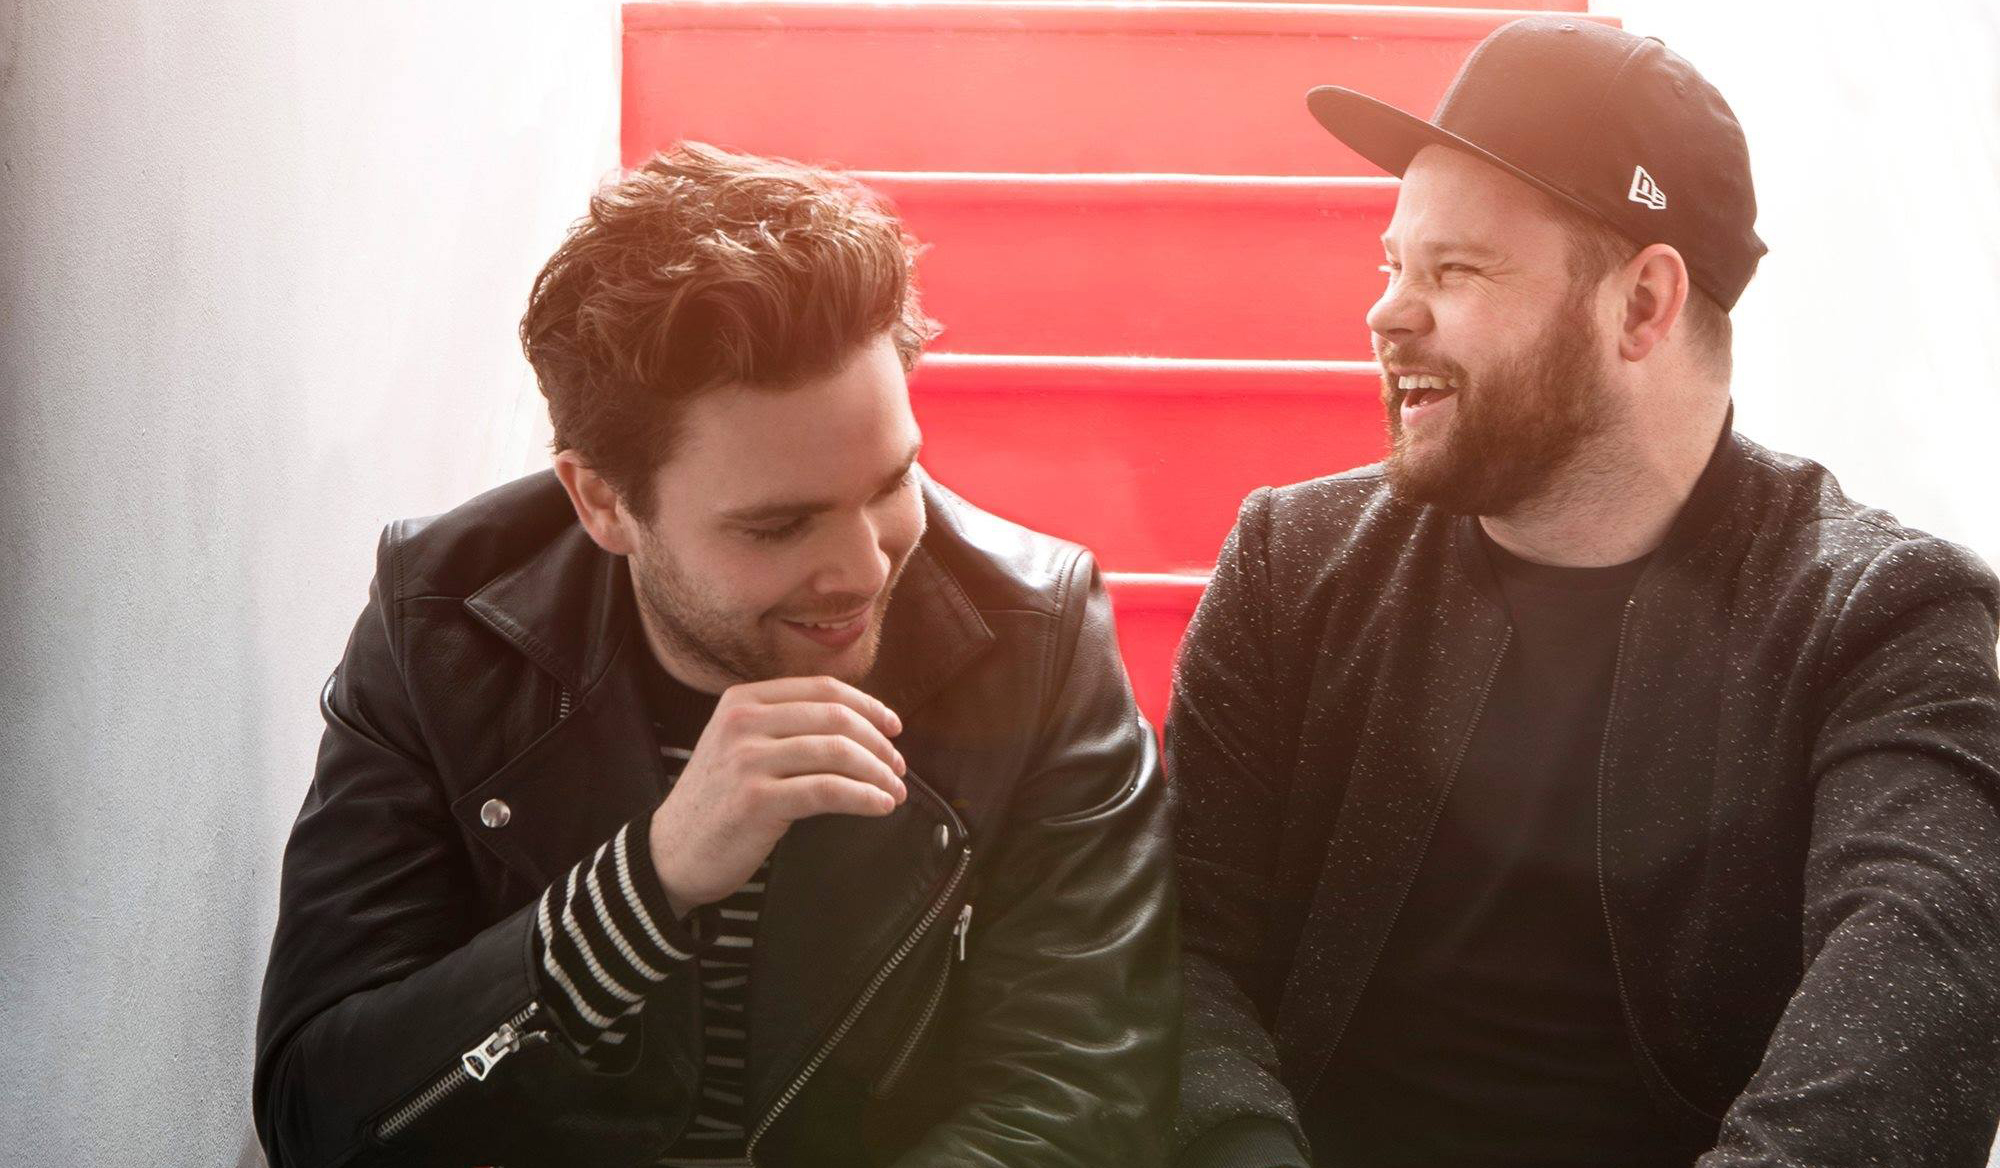 Interview: Royal Blood On Their New Record, Touring Life & Visiting Mrs Doubtfire's House